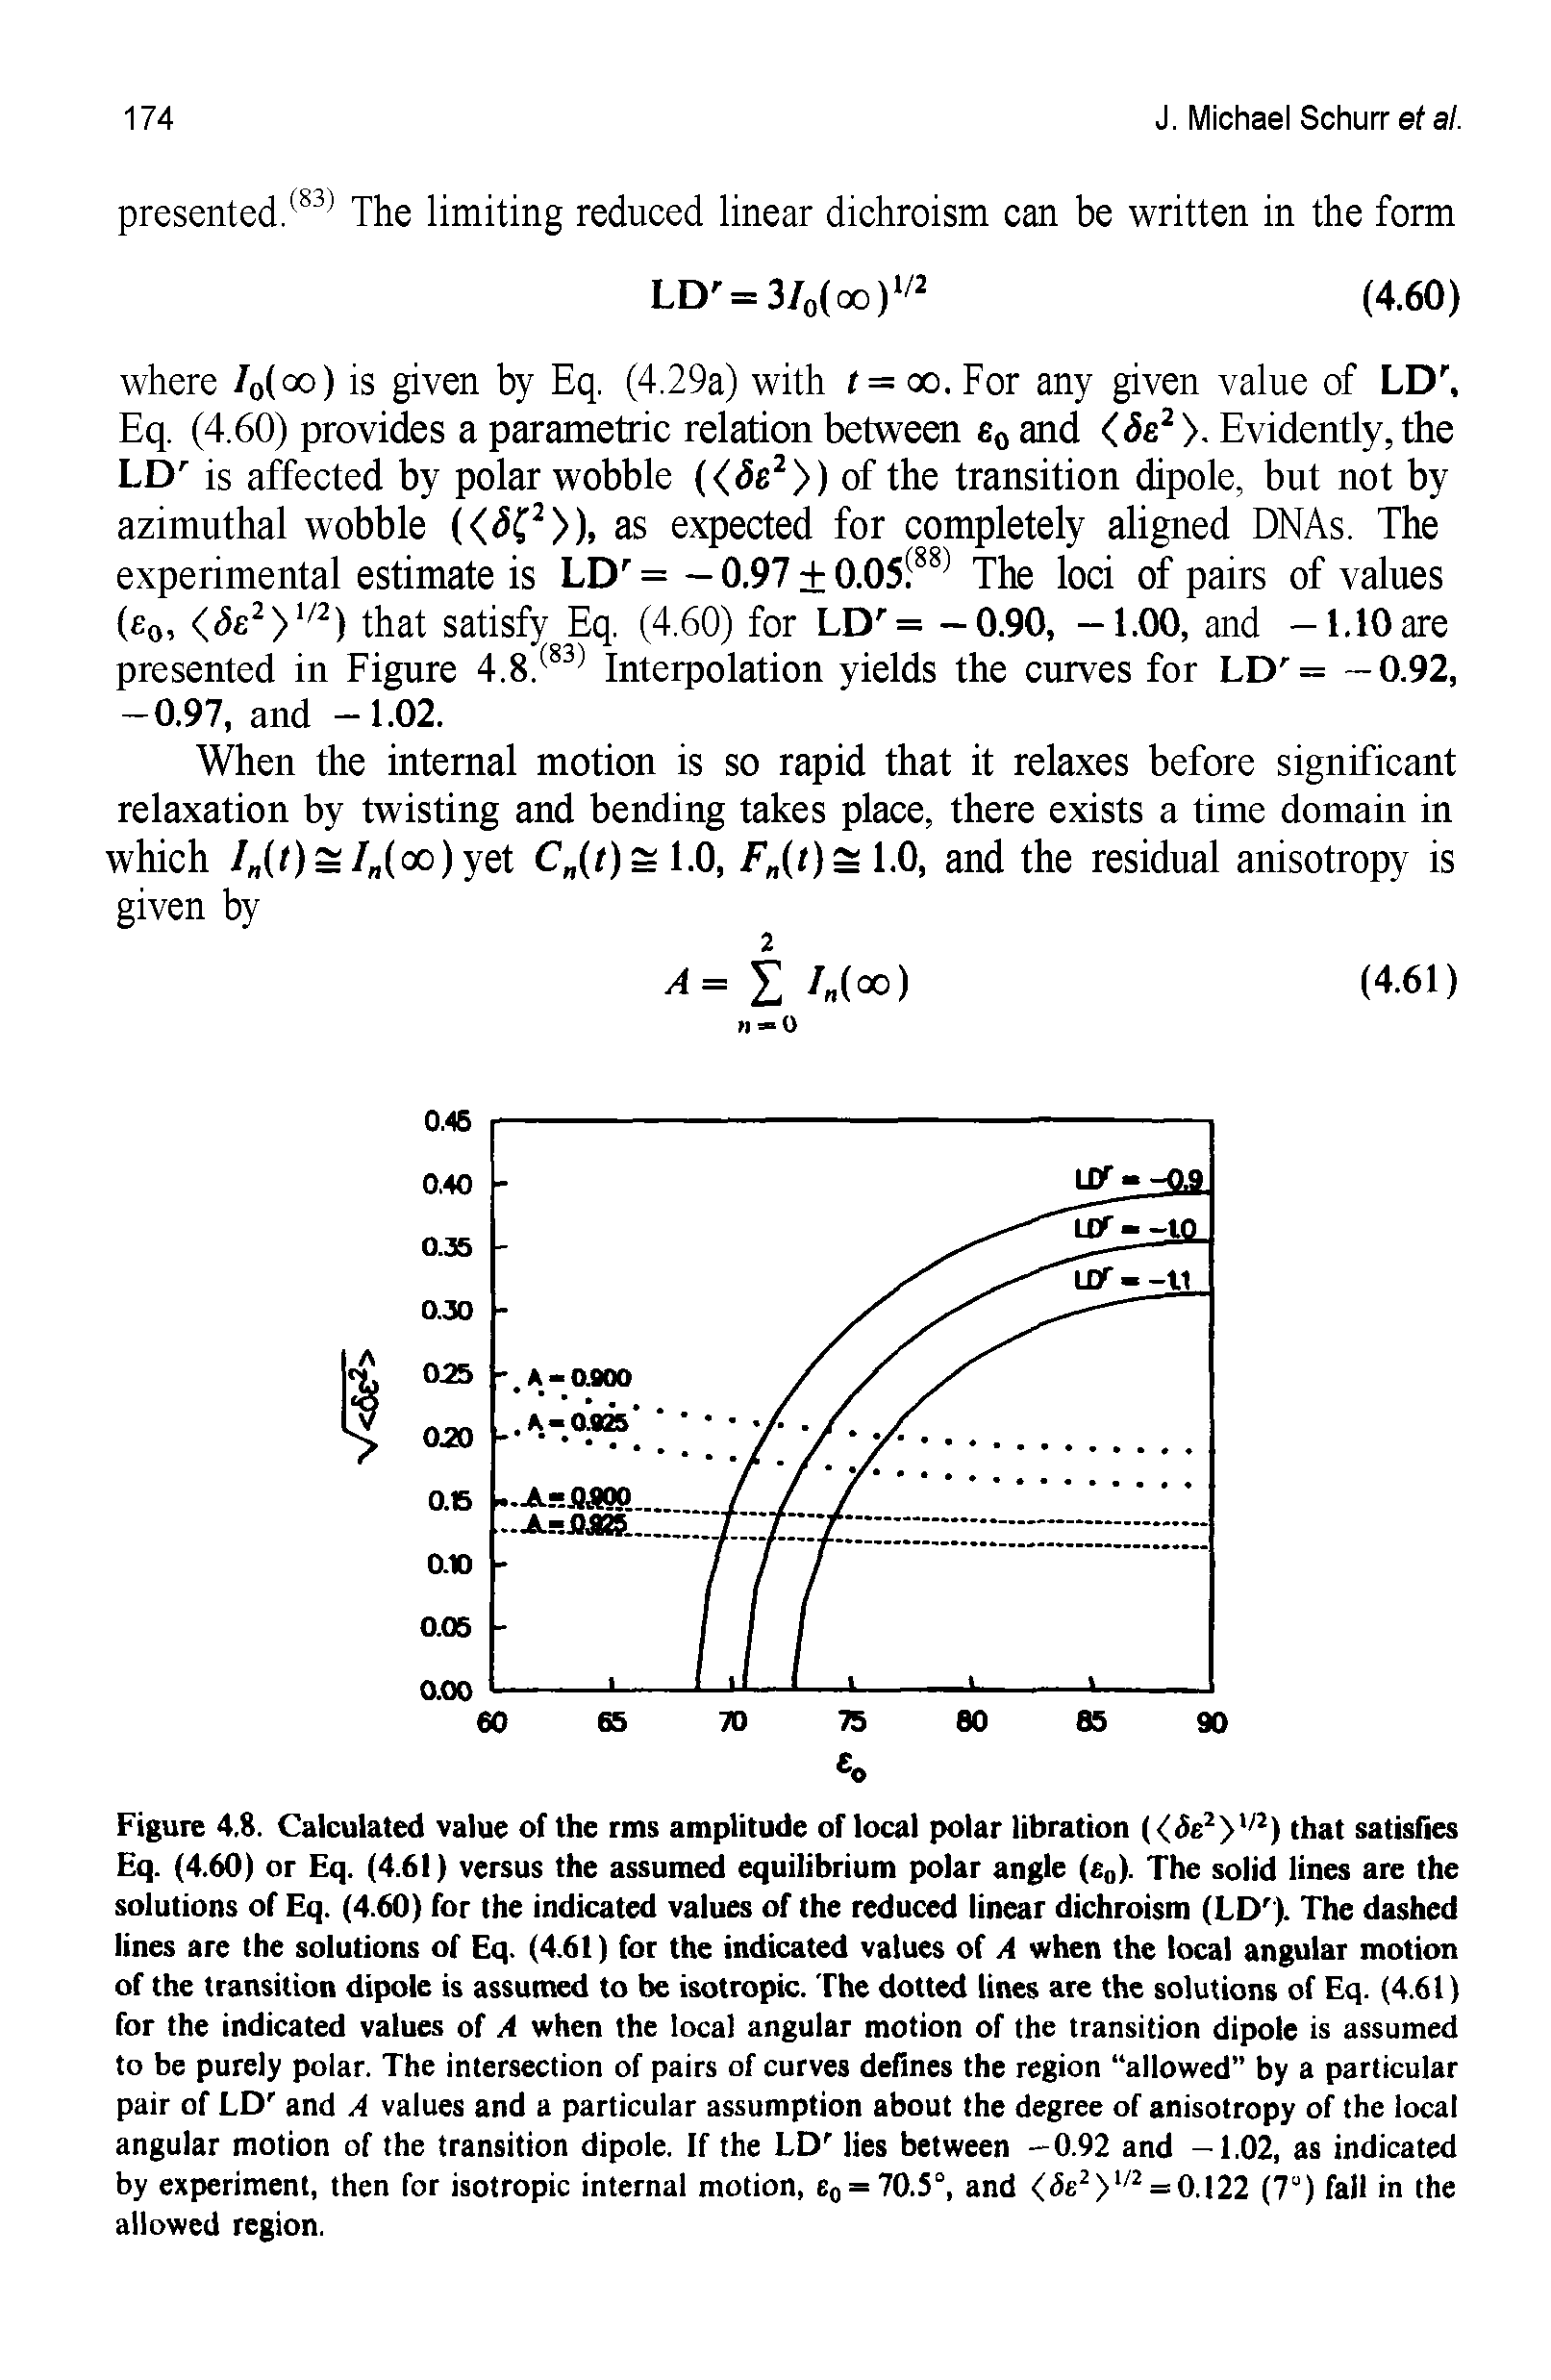 Figure 4.8. Calculated value of the rms amplitude or local polar libration (<5e2> /2) that satisfies Eq. (4.60) or Eq. (4.61) versus the assumed equilibrium polar angle (e0). The solid lines are the solutions of Eq. (4.60) for the indicated values of the reduced linear dichroism (LDr). The dashed lines are the solutions of Eq. (4.61) for the indicated values of A when the local angulaT motion of the transition dipole is assumed to be isotropic. The dotted lines are the solutions of Eq. (4.61) for the indicated values of A when the local angular motion of the transition dipole is assumed to be purely polar. The intersection of pairs of curves defines the region allowed" by a particular pair of LDr and A values and a particular assumption about the degree of anisotropy of the local angular motion of the transition dipole. If the LDr lies between -0.92 and -1.02, as indicated by experiment, then for isotropic internal motion, e0 = 70.5°, and <i5e2>1/2 = 0.122 (7°) fall in the allowed region.